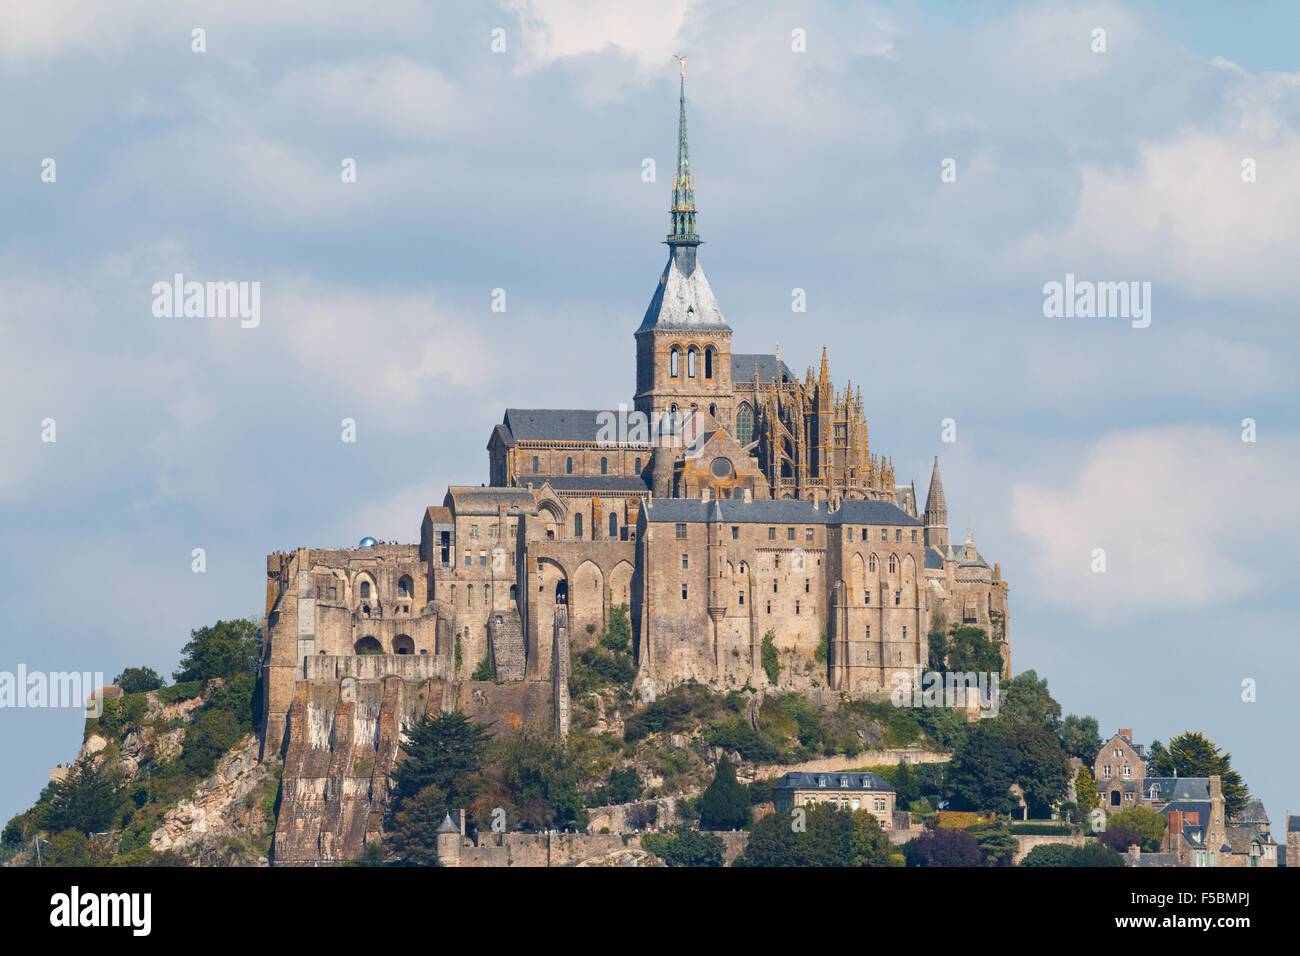 The monastery of Le Mont Saint-Michel in the late summer sun. Approximately 9000 tourists a day visit the famous island. Stock Photo